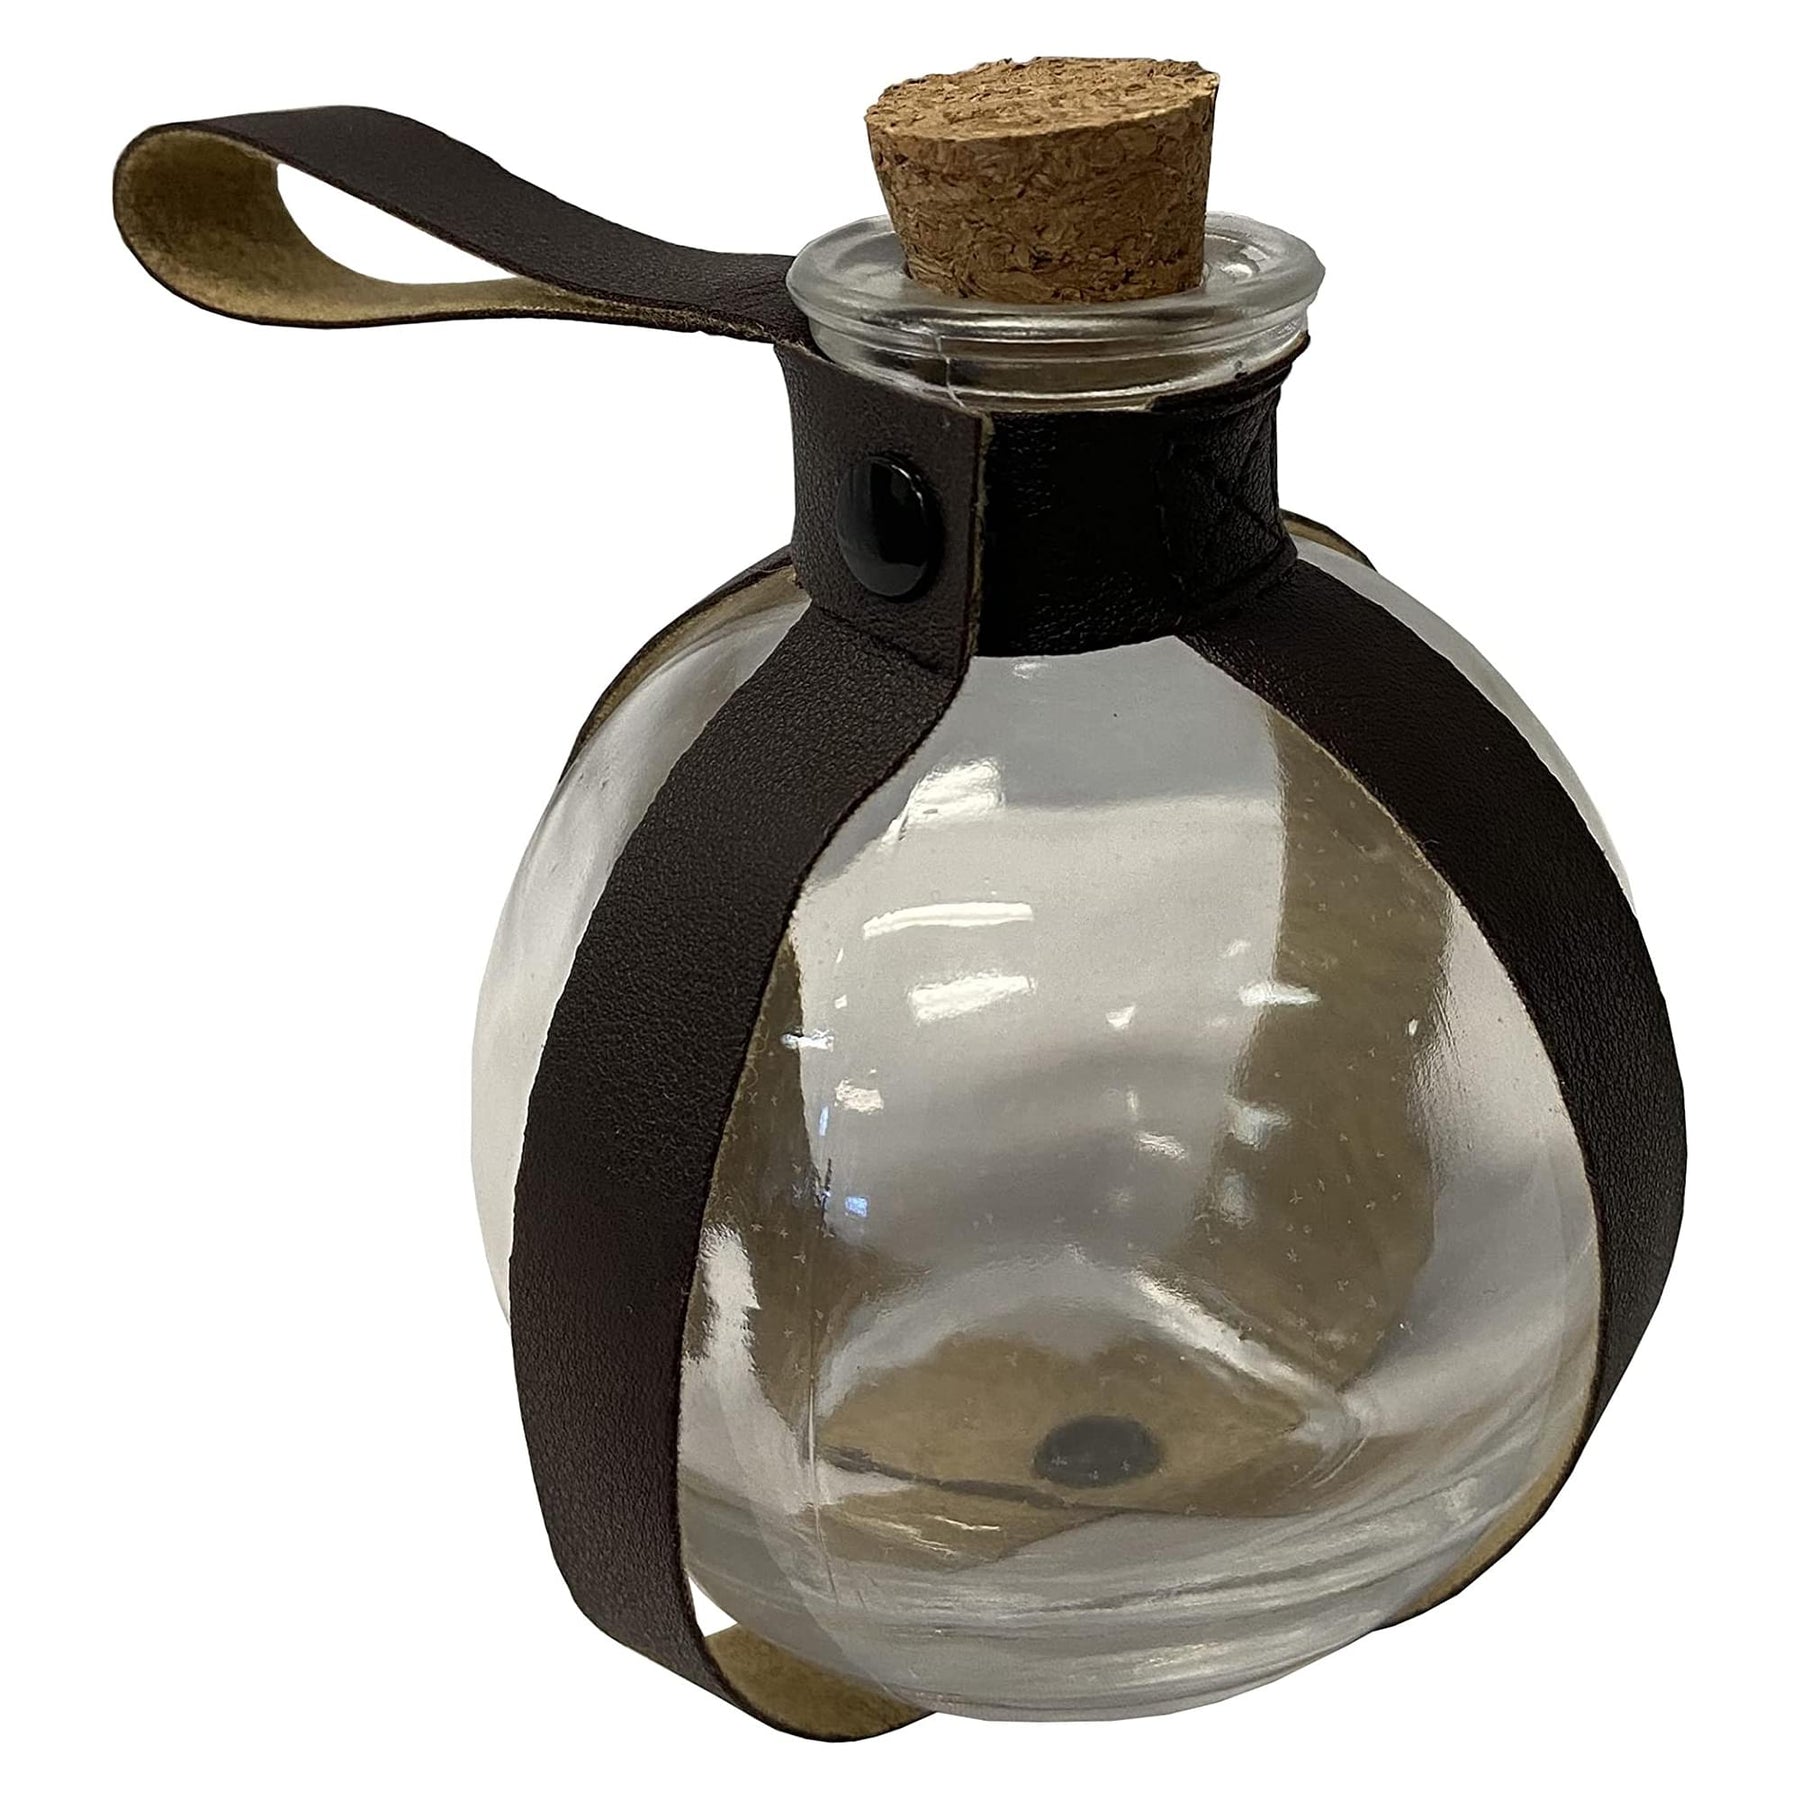 Magic Potion Bottle with Brown Strap Costume Accessory